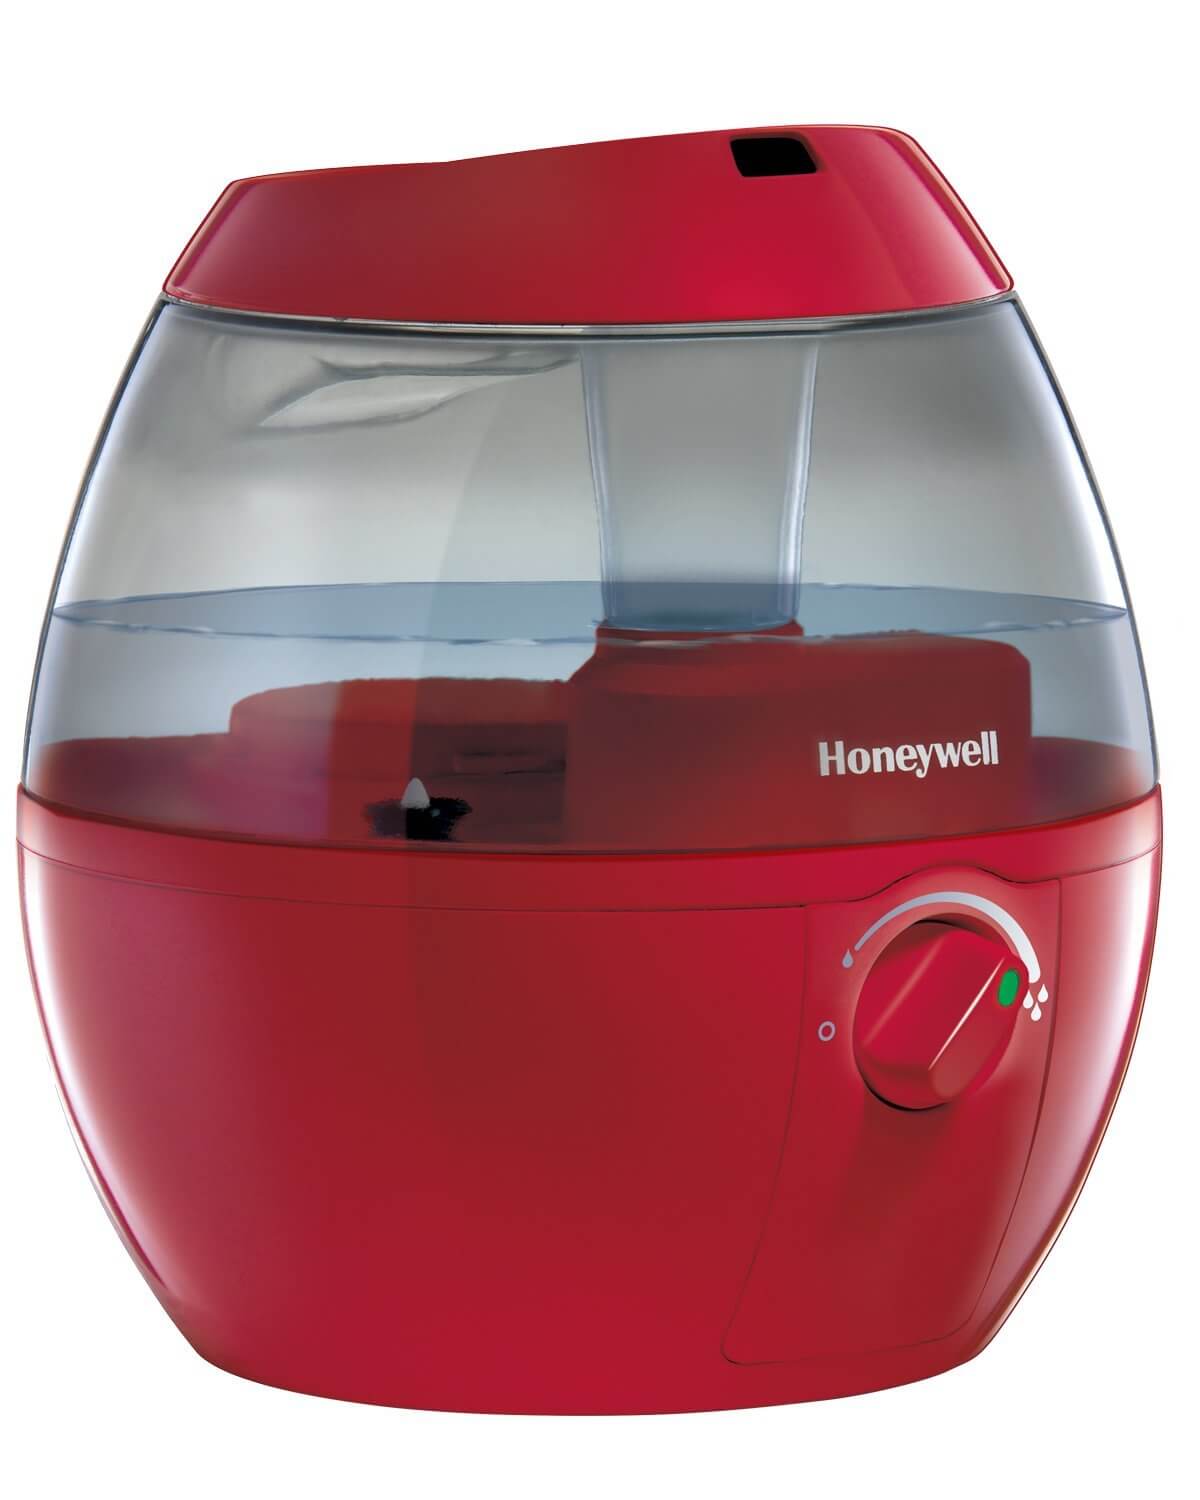 Using The Honeywell Mistmate As A Small Room Humidifier